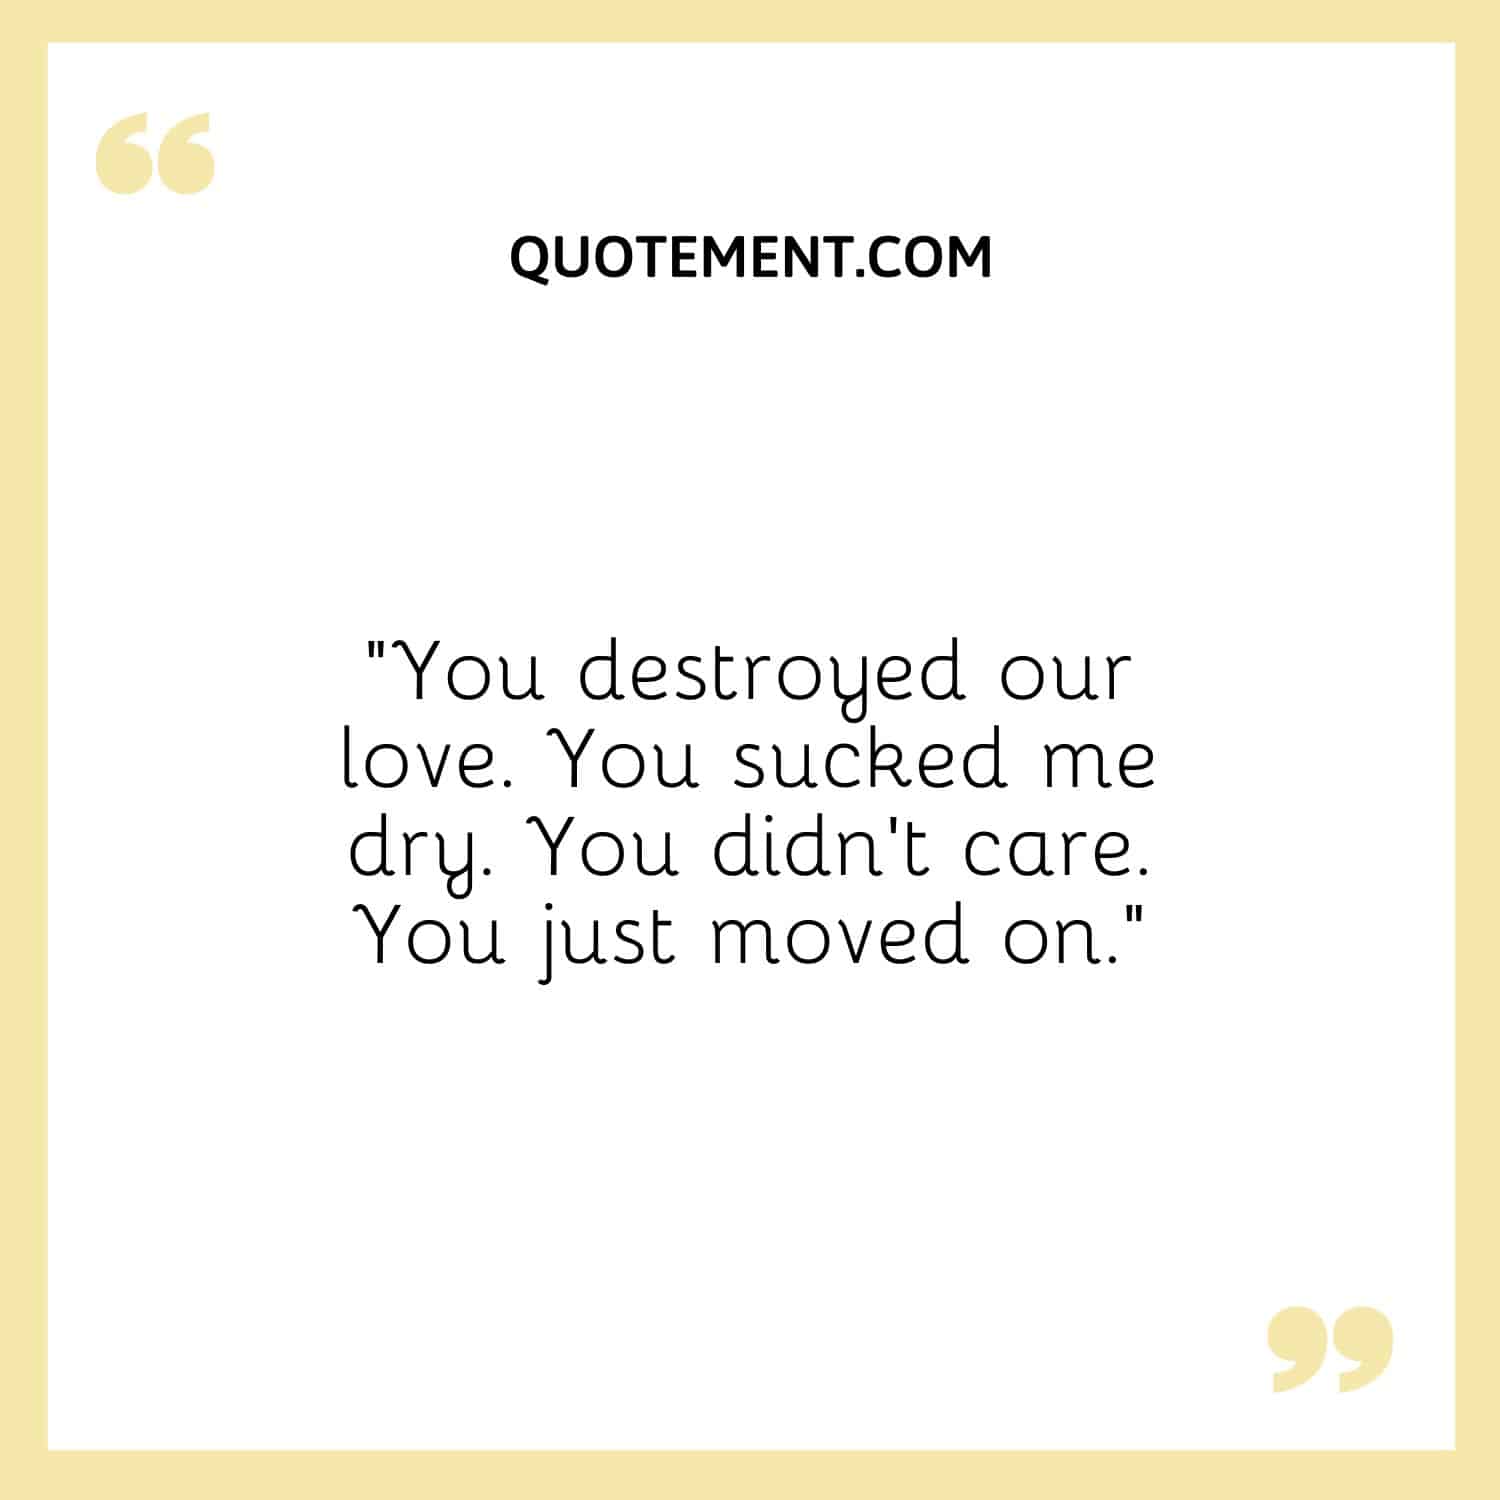 You destroyed our love